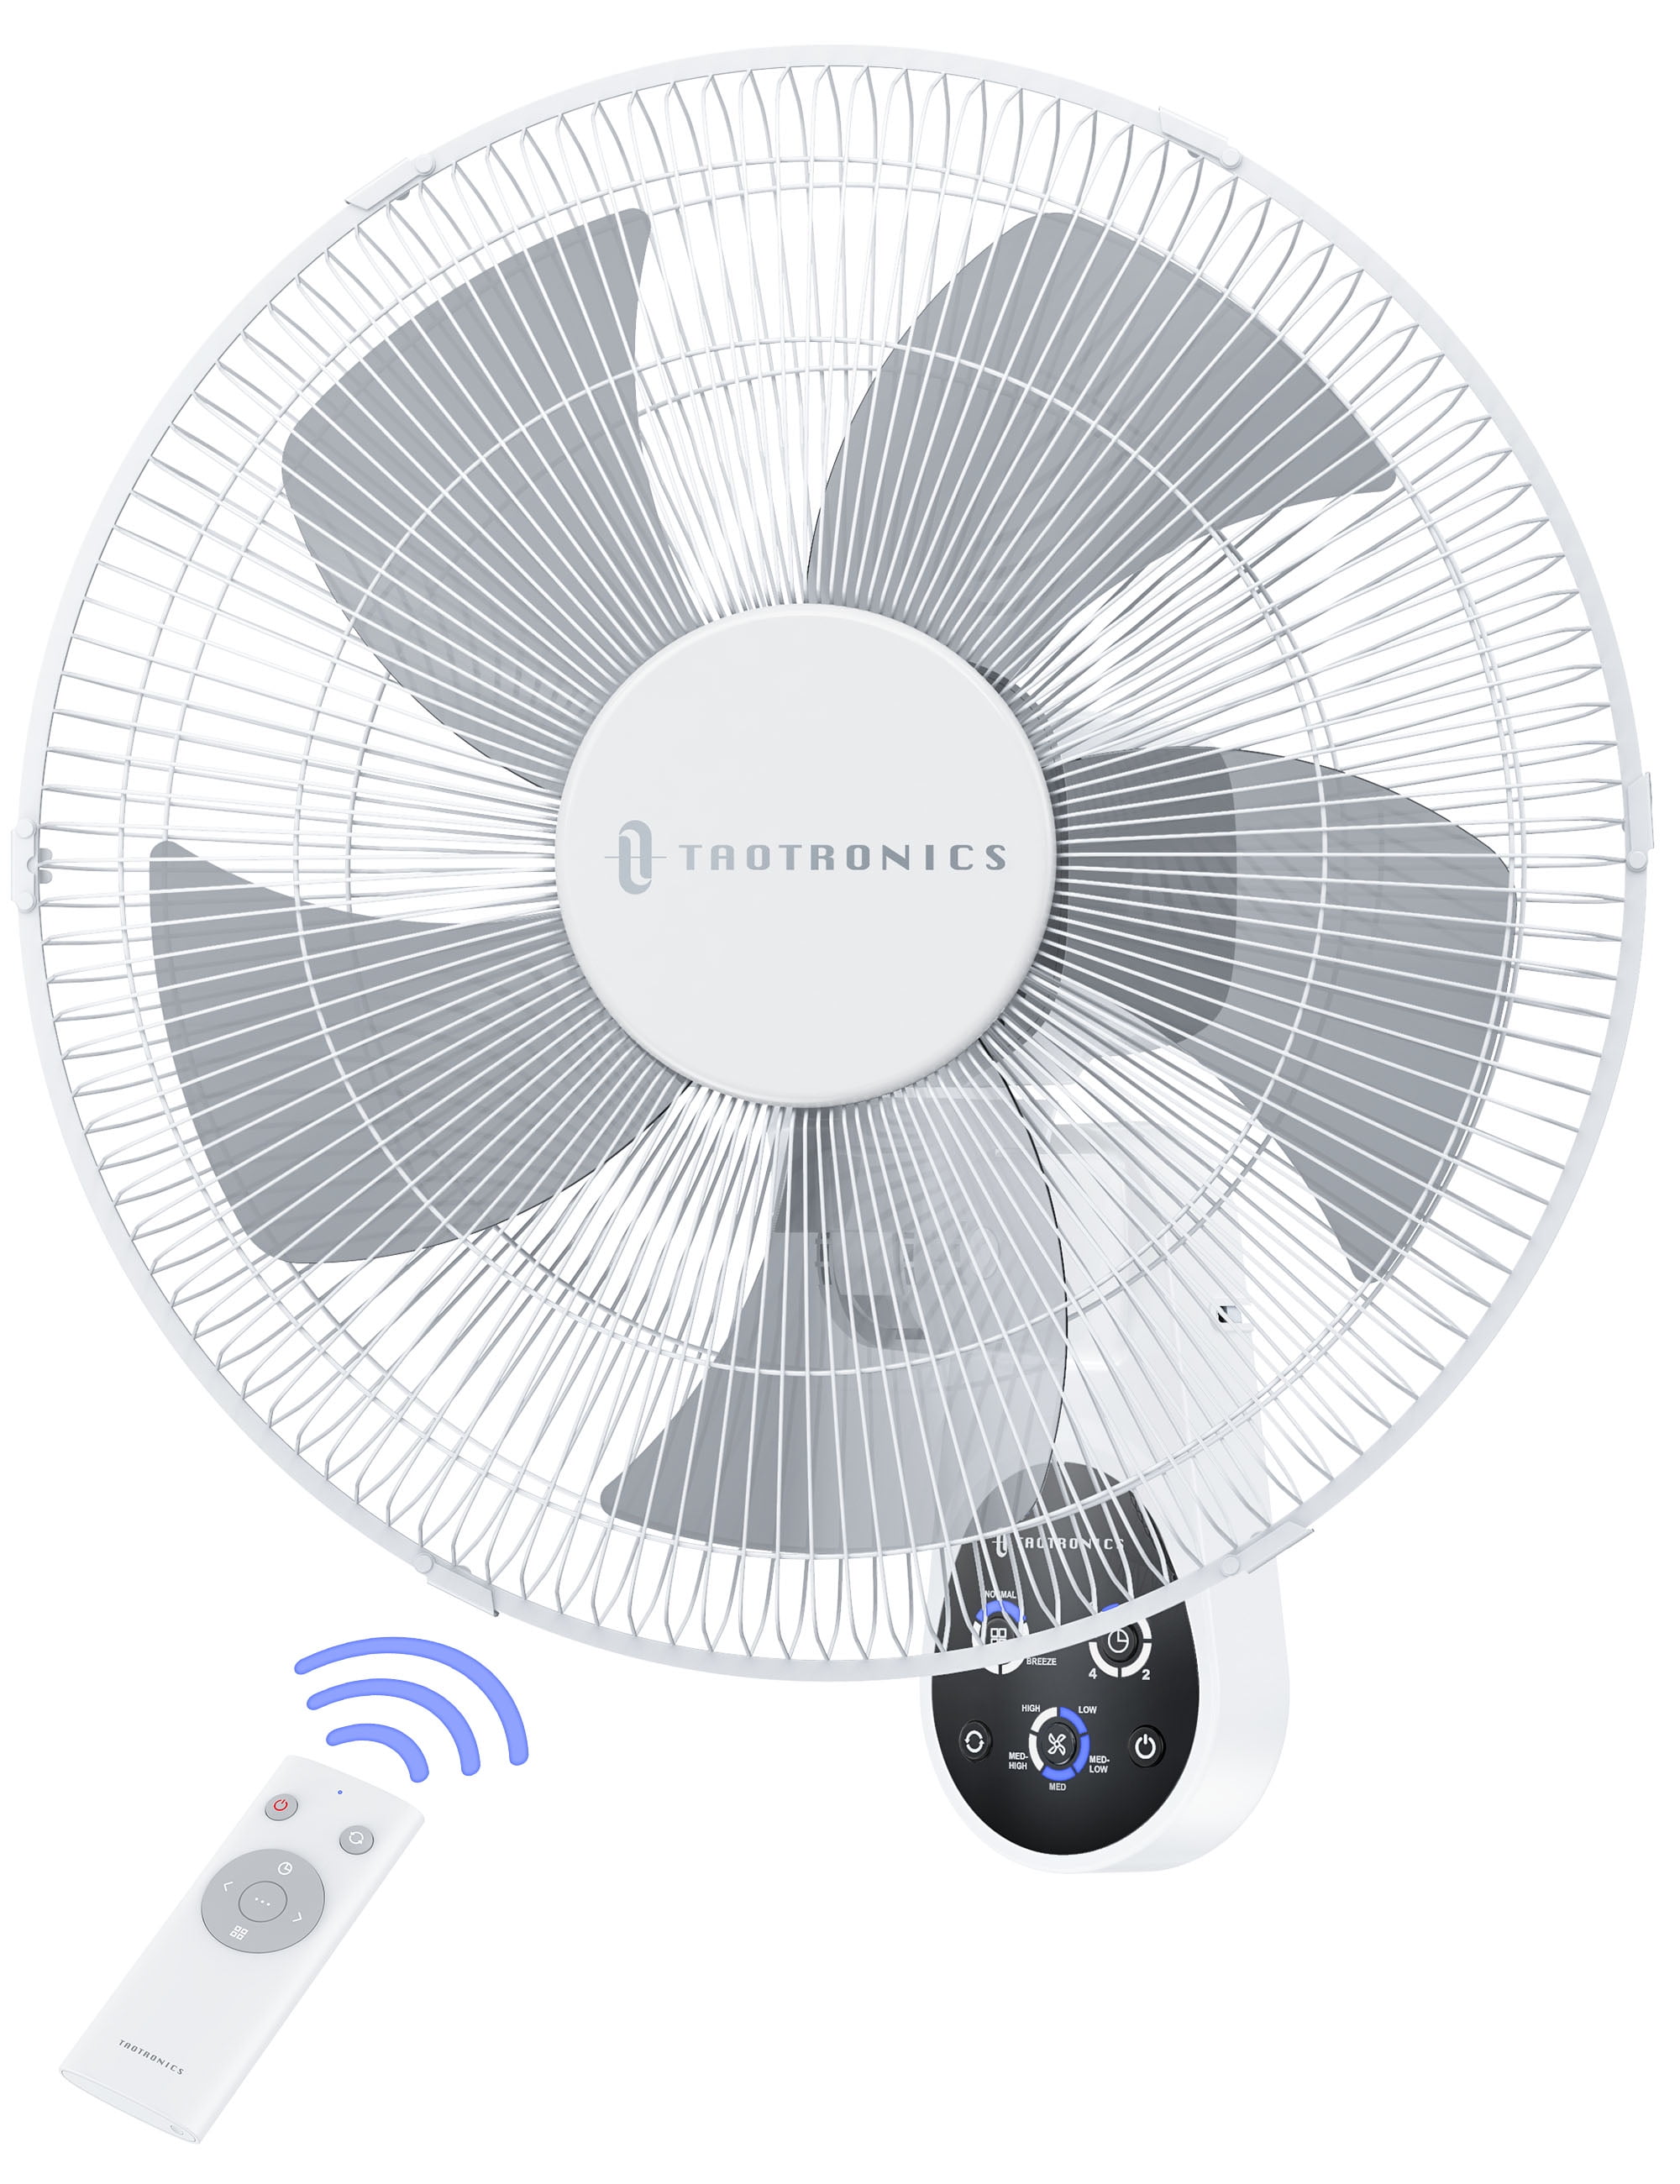 mechanical electric fan 7.5 hours timer 20 inches wall fan Wall Mounted Fans remote control retro oscillating 